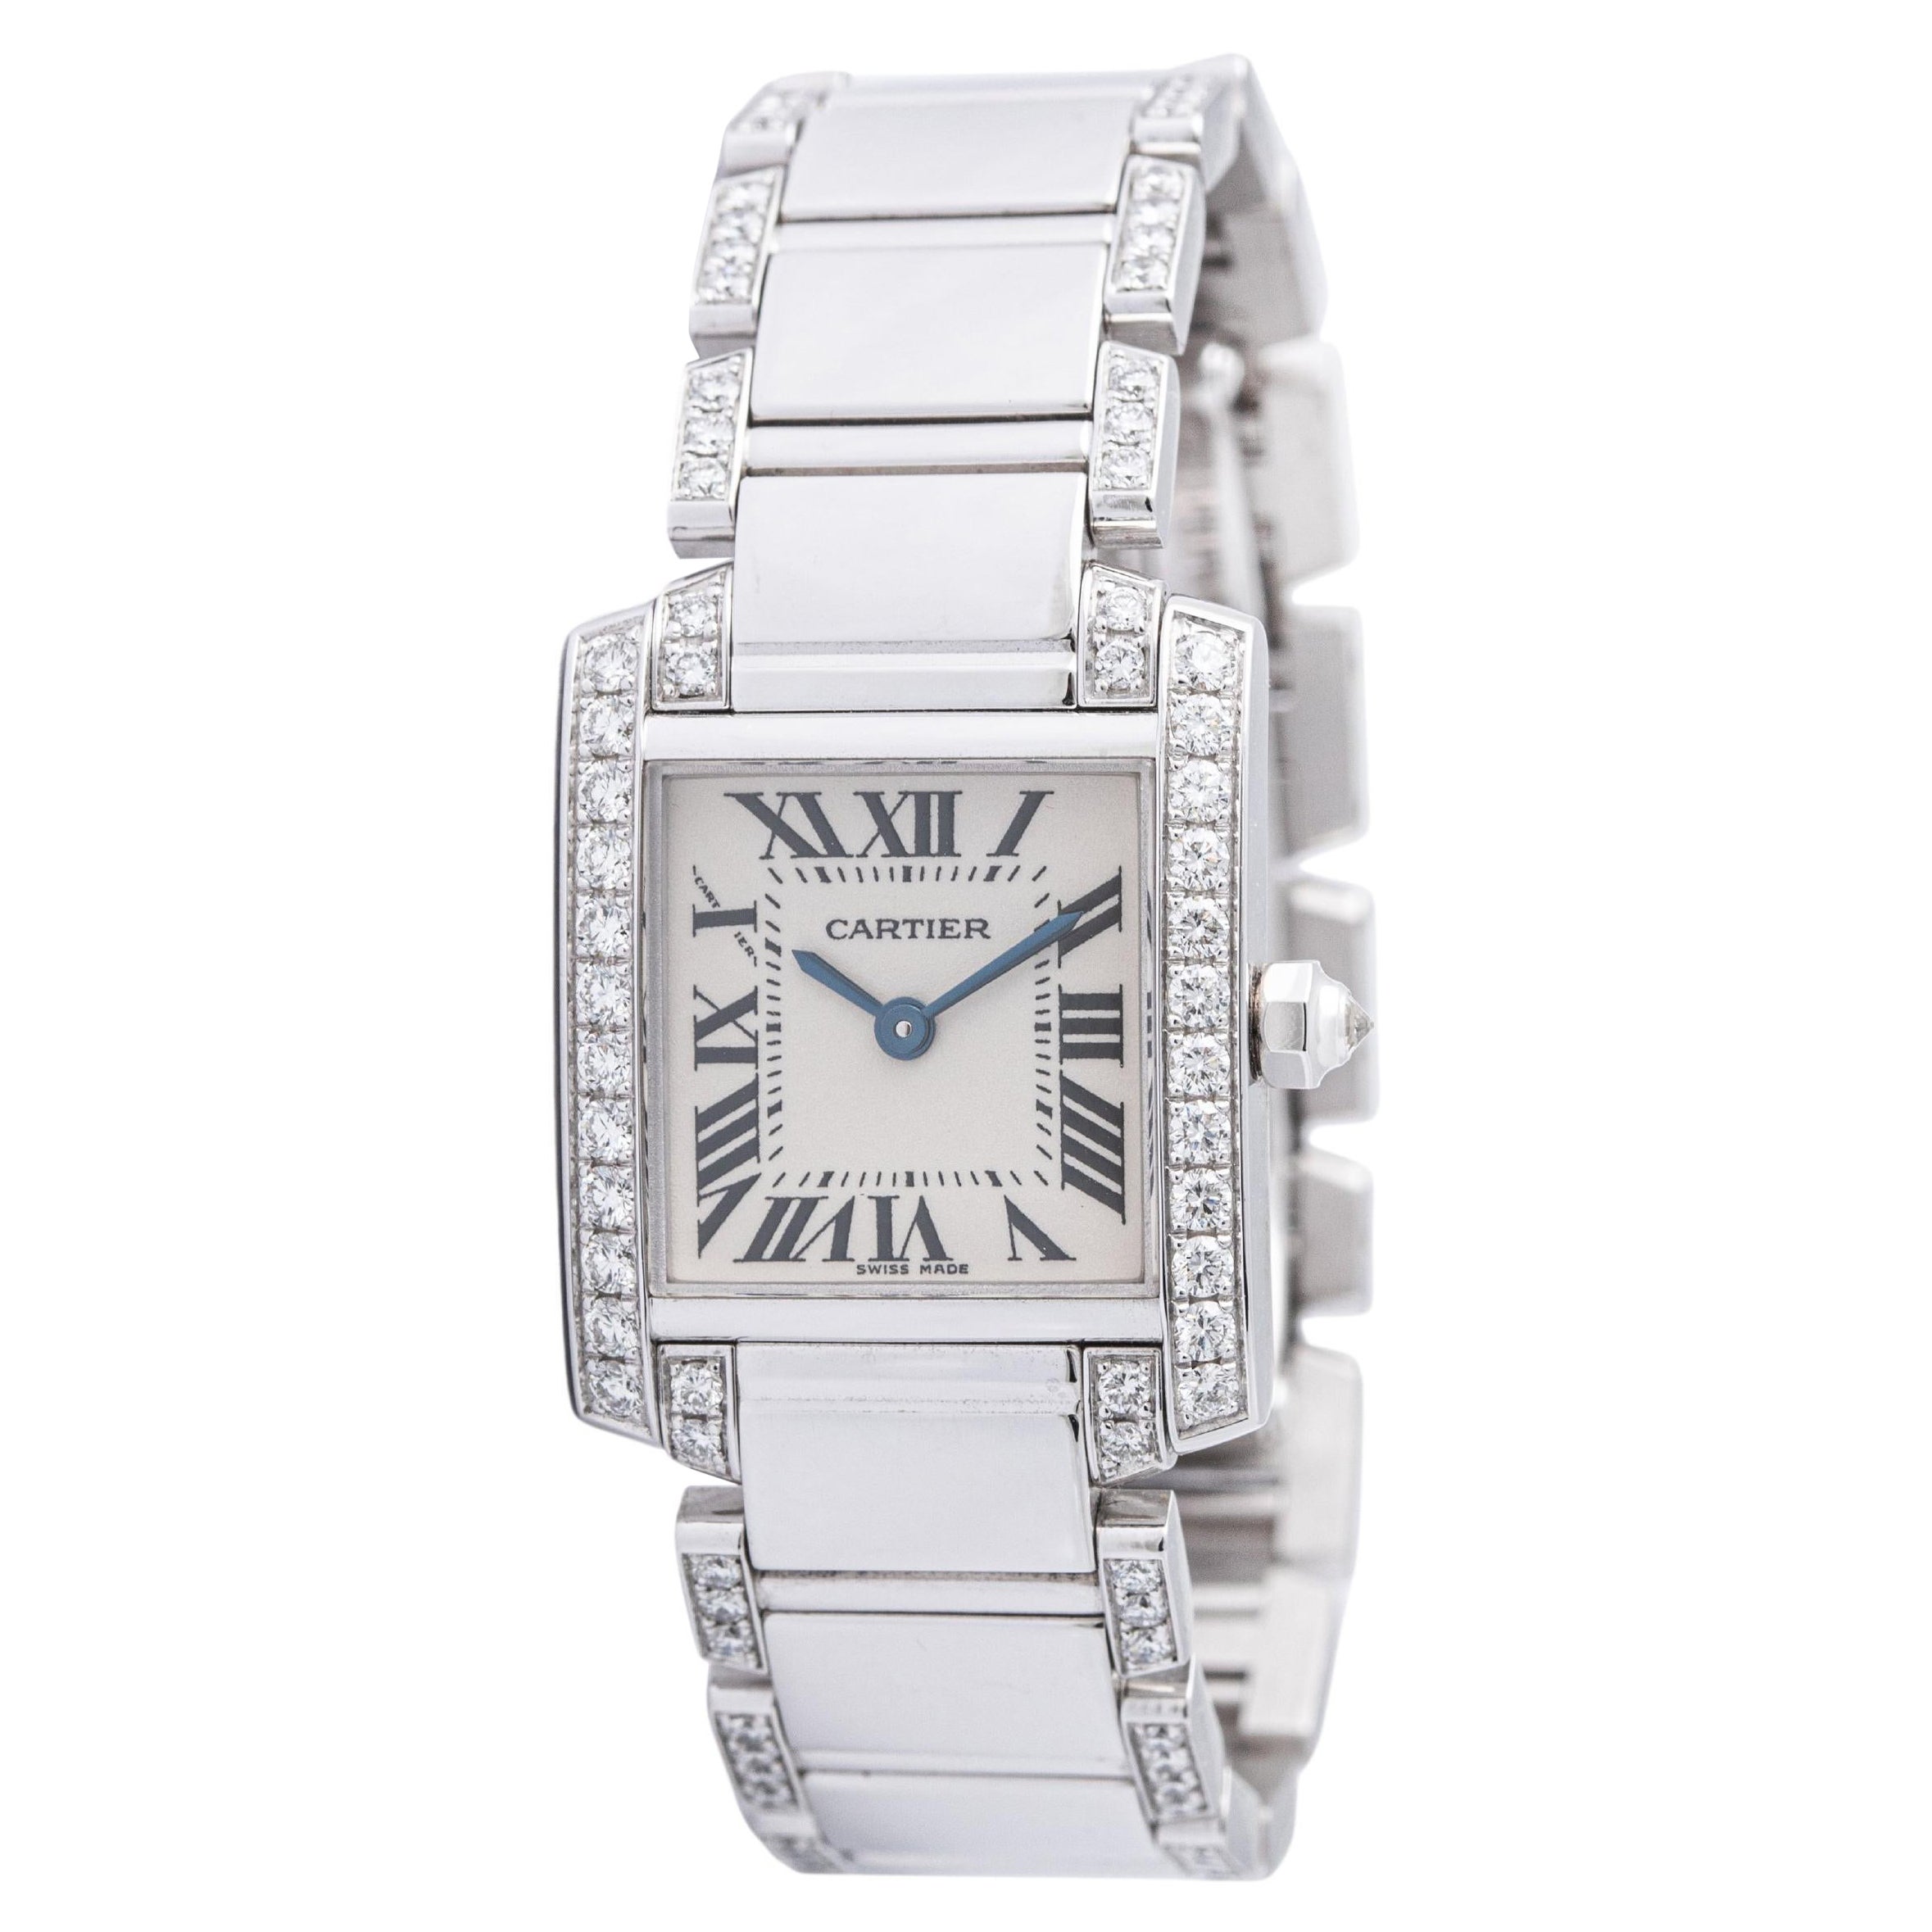 What is special about Cartier Tank watch?